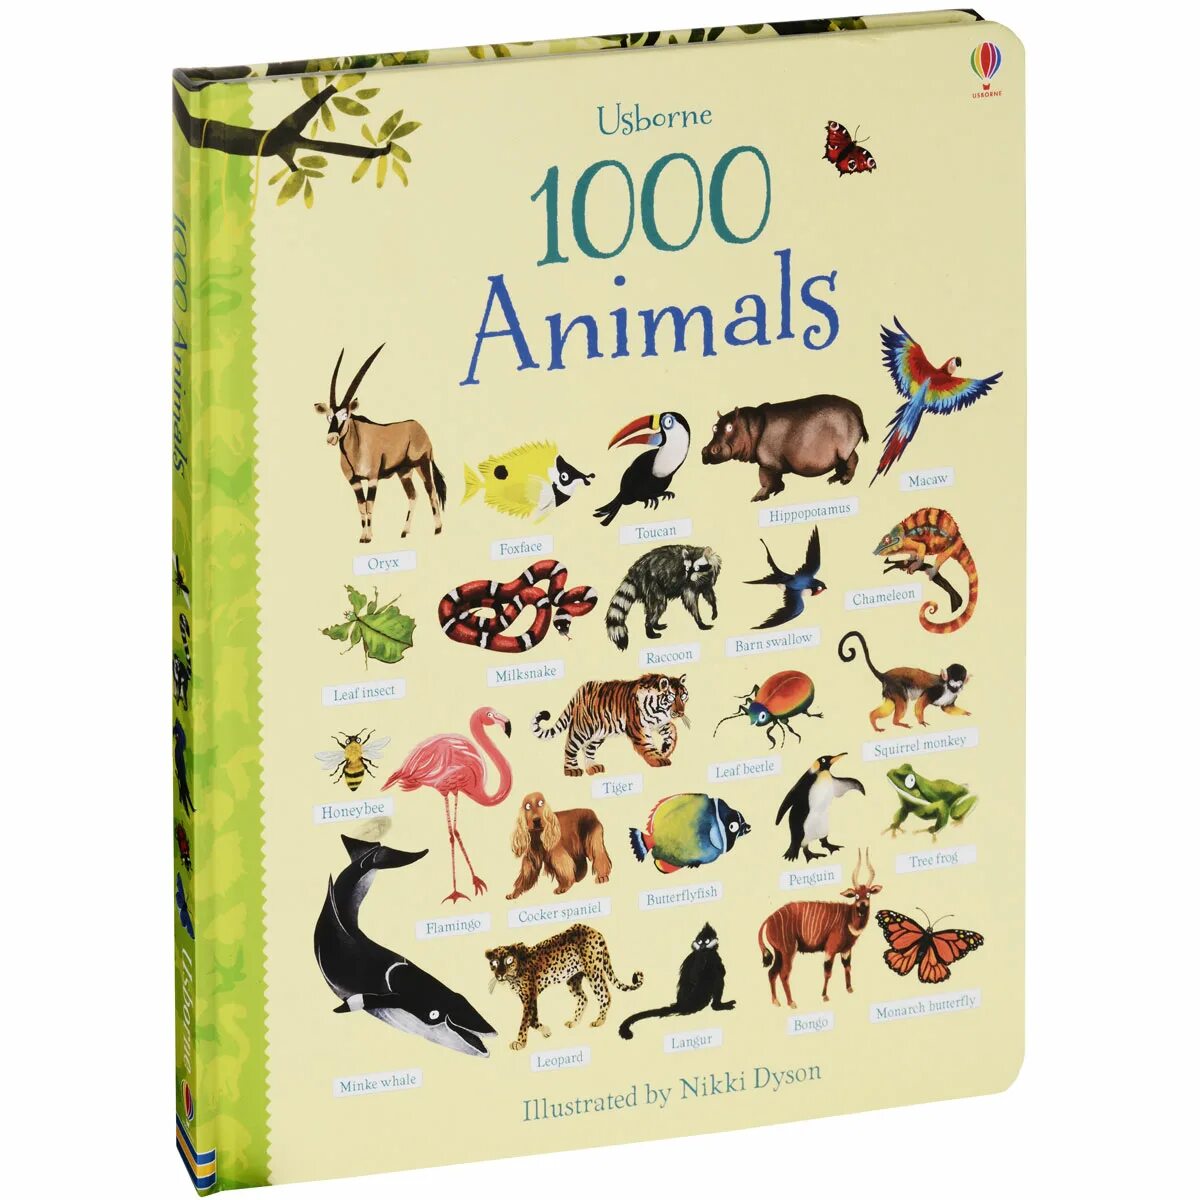 Книга animals animals. Книга animals. Book about animals. 1000 Анималс. The animal book.